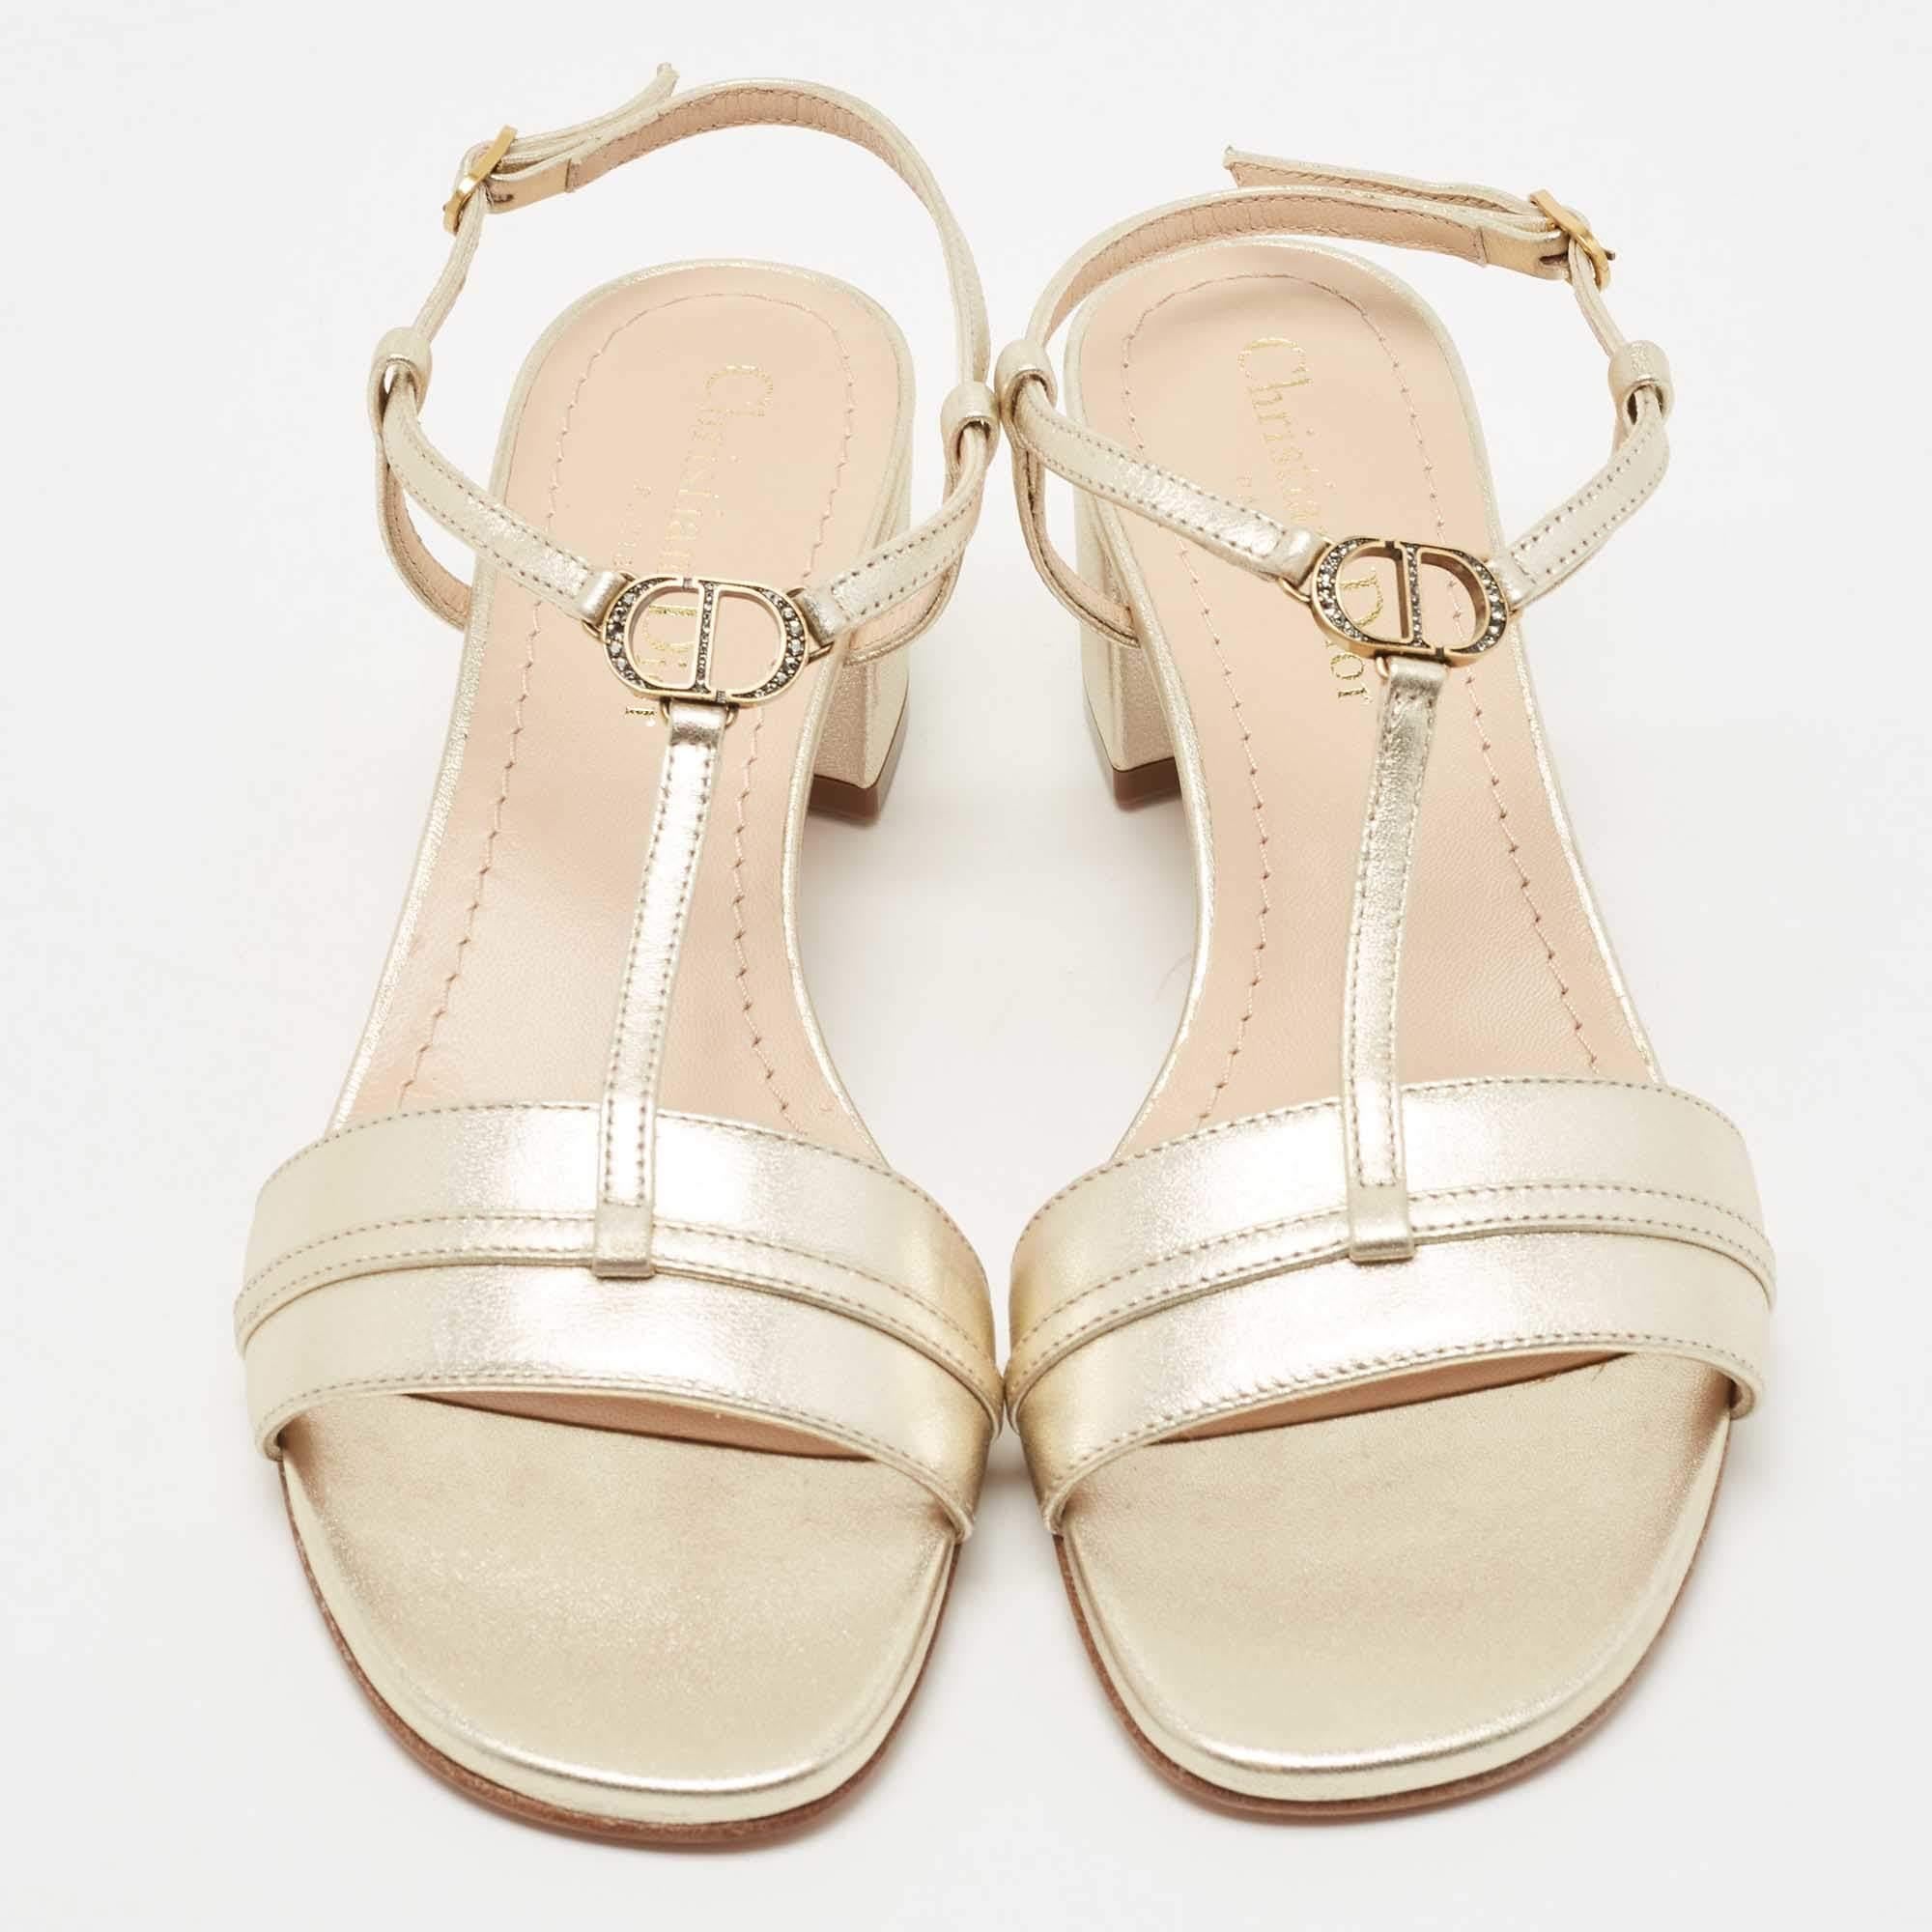 Dior Metallic Gold Leather T Strap Sandals Size 36.5 1